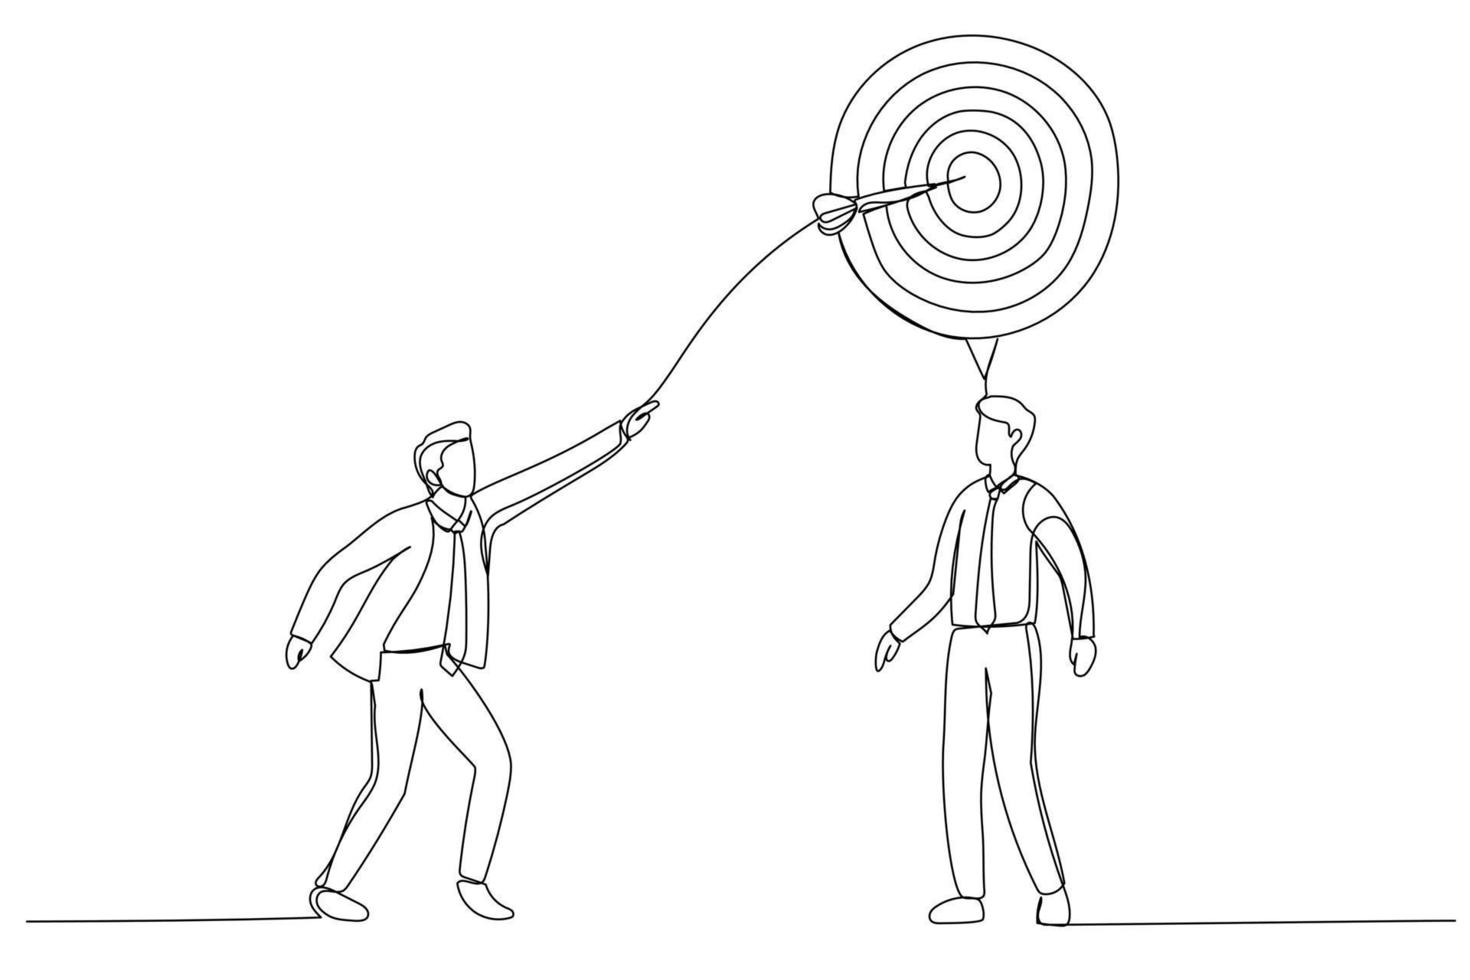 Illustration of Businessman Throw a Dart Into Target On Customer Mind. One continuous line art style vector